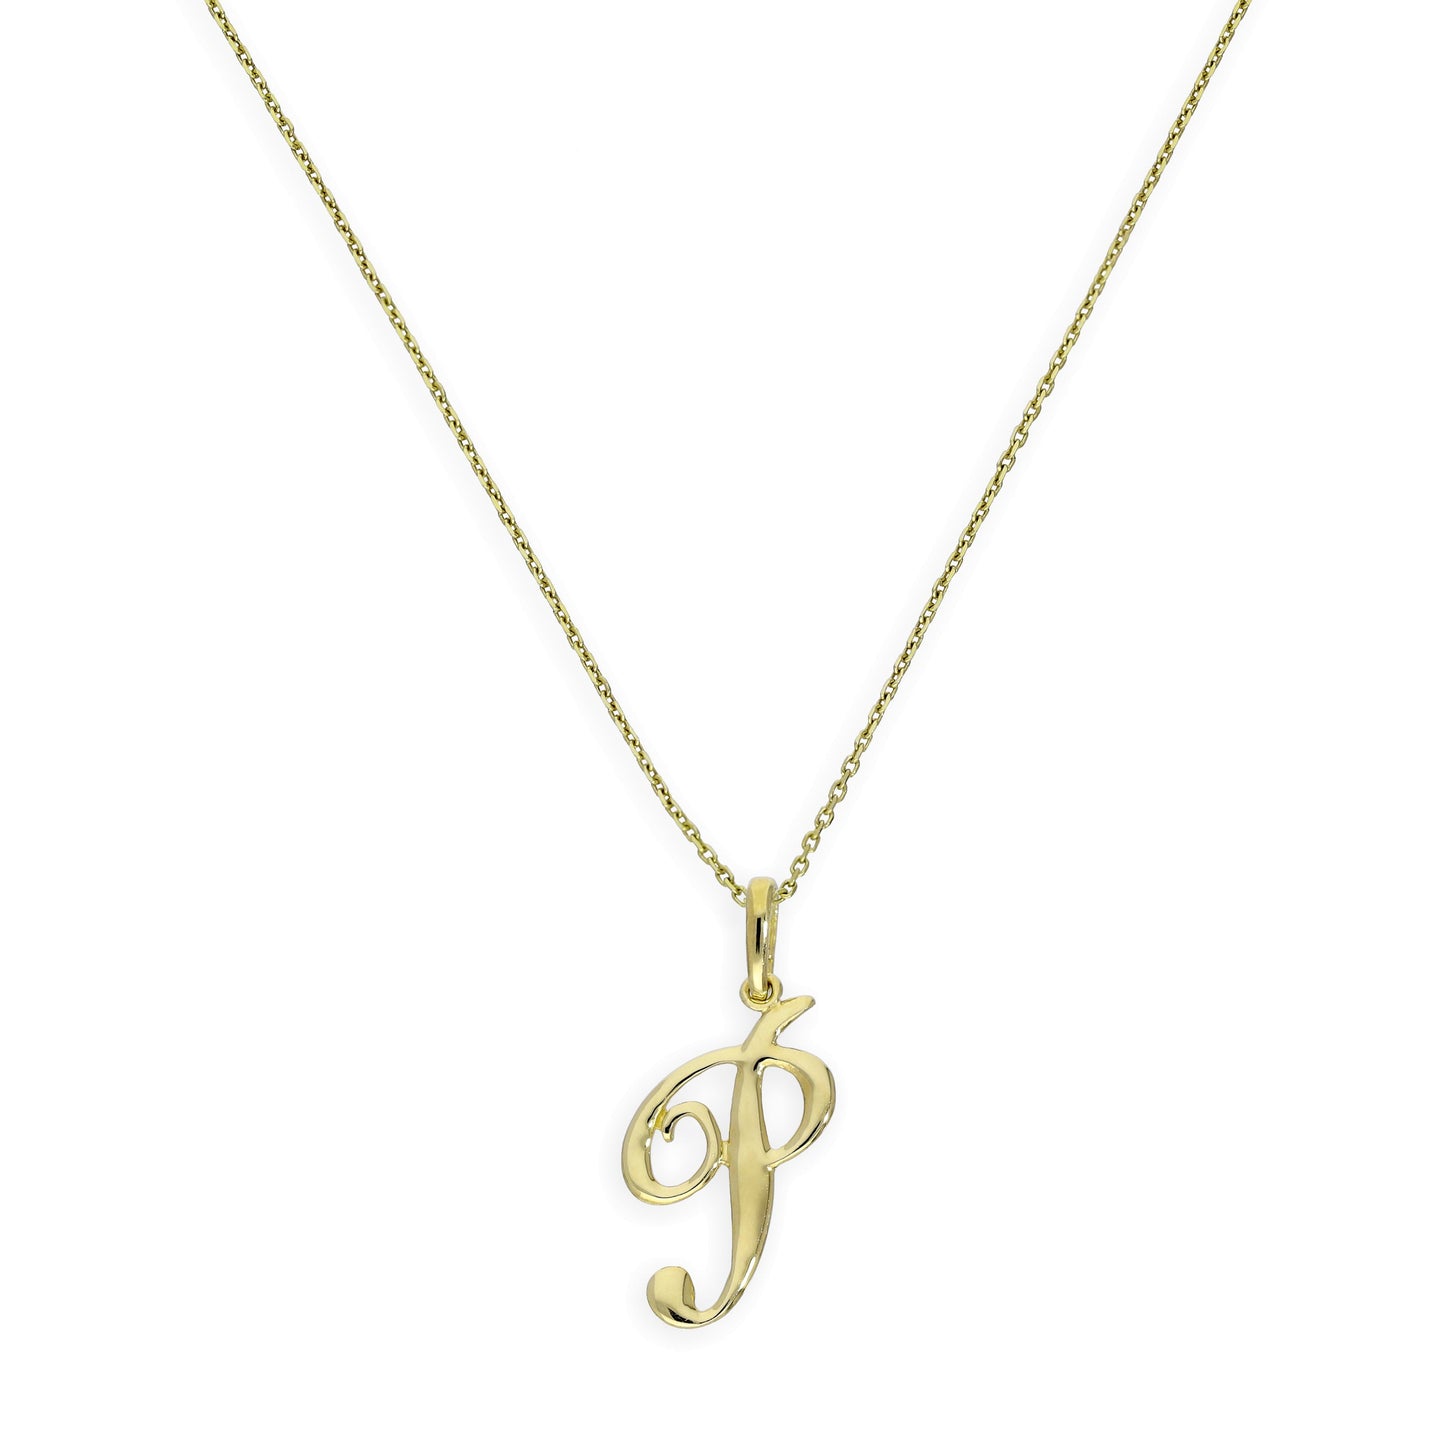 9ct Gold Fancy Calligraphy Script Letter P Pendant Necklace 16 - 20 Inches